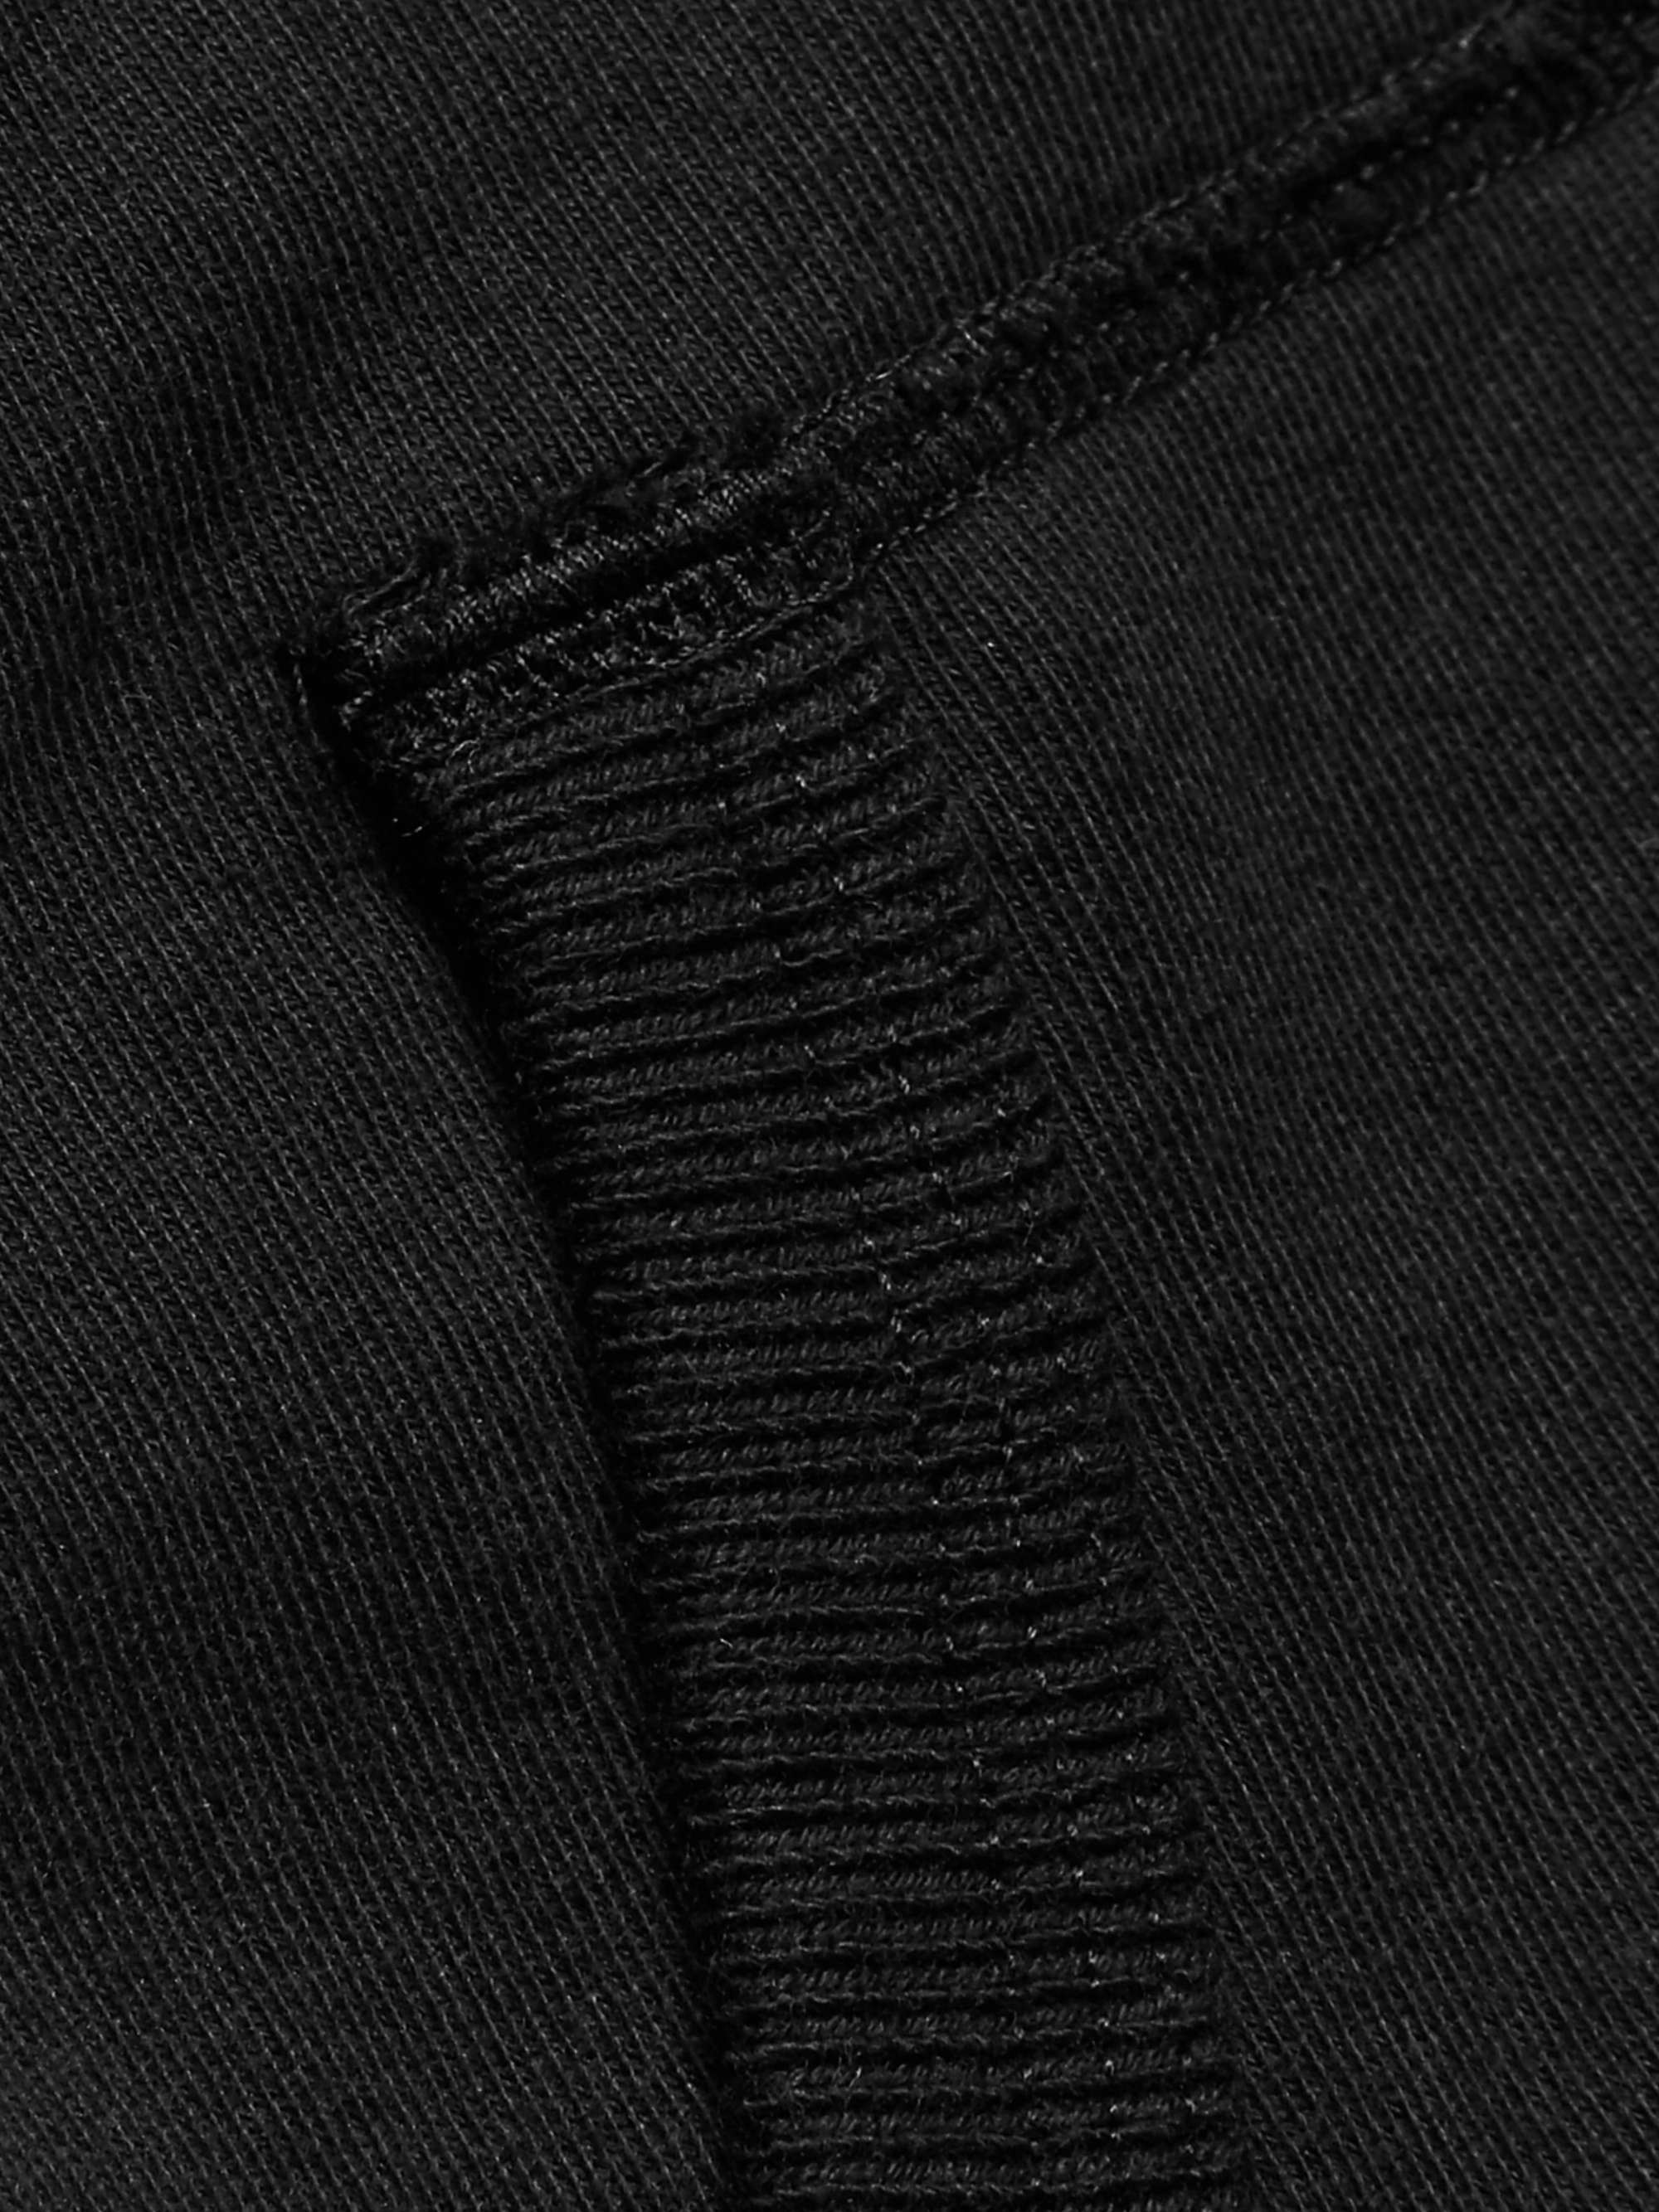 REIGNING CHAMP Loopback Cotton-Jersey Zip-Up Hoodie